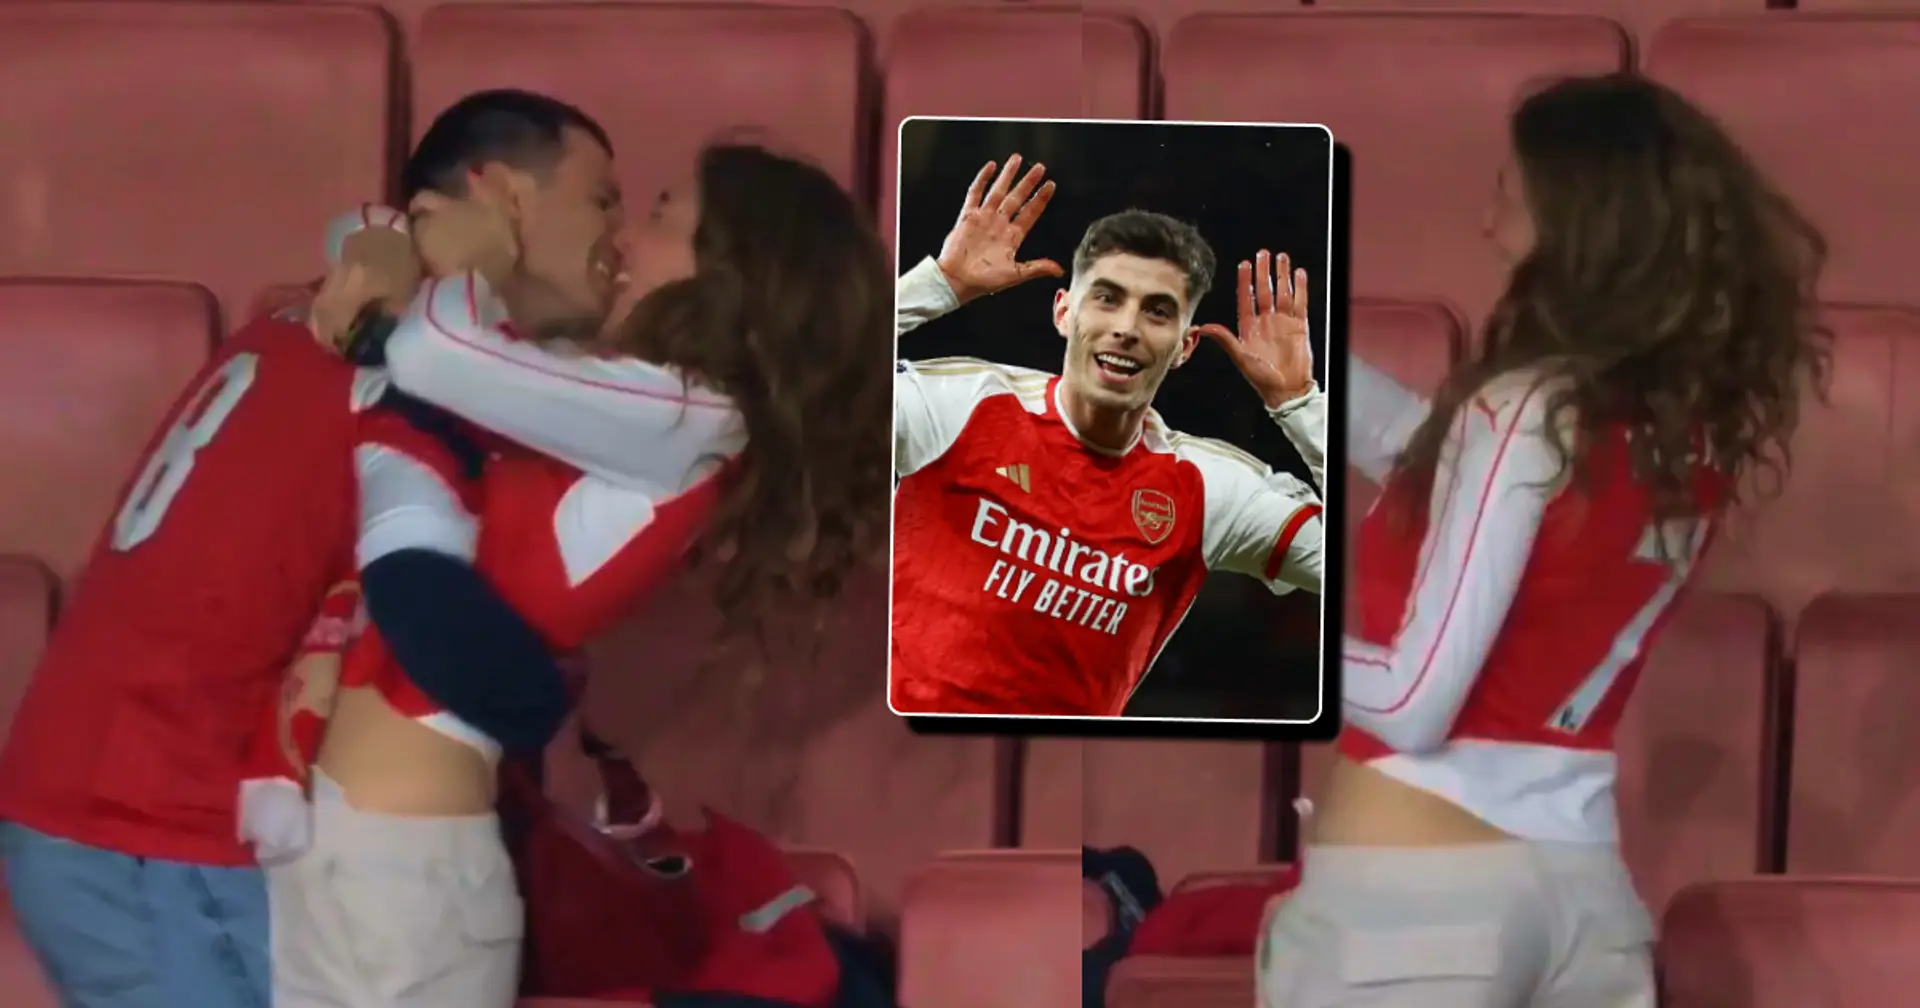 Love is in the air! Arsenal fans can't stop kissing after 5-0 Chelsea win